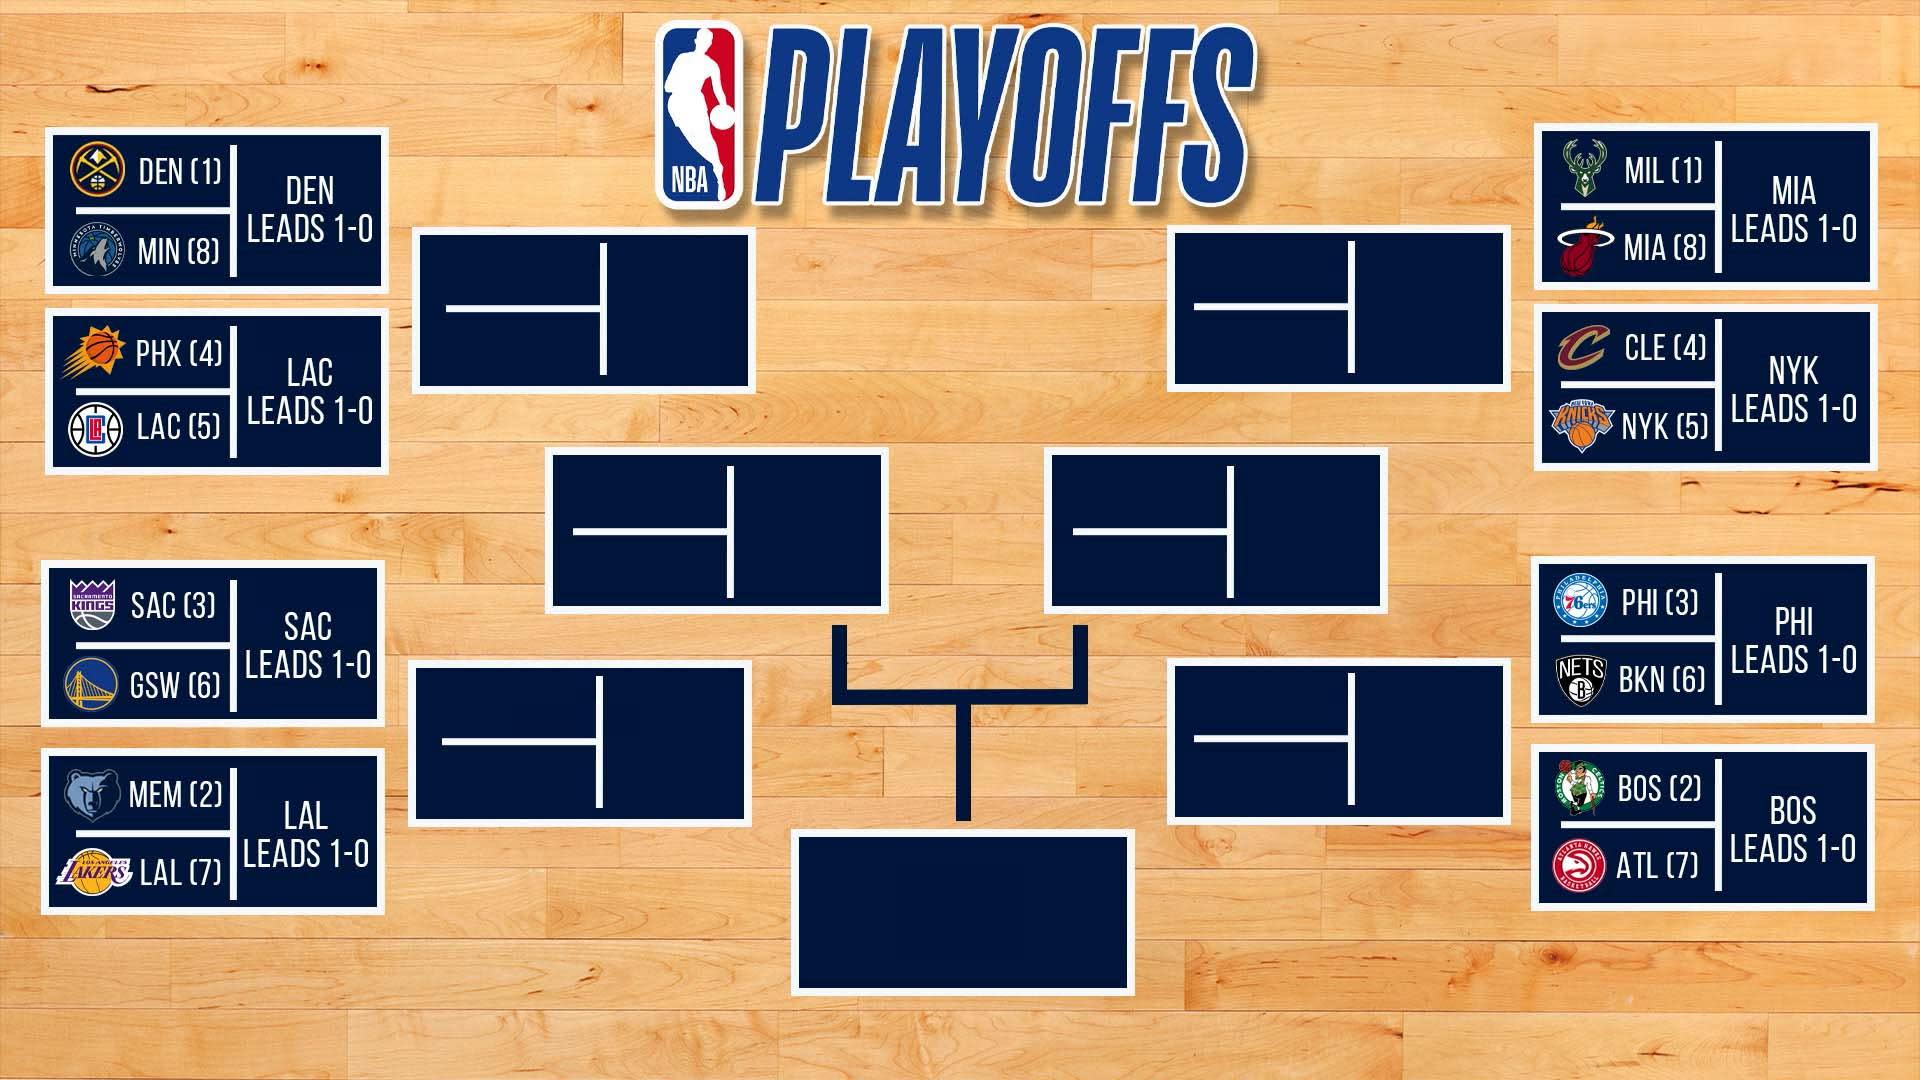 NBA playoffs first round results, schedule, times and where to watch